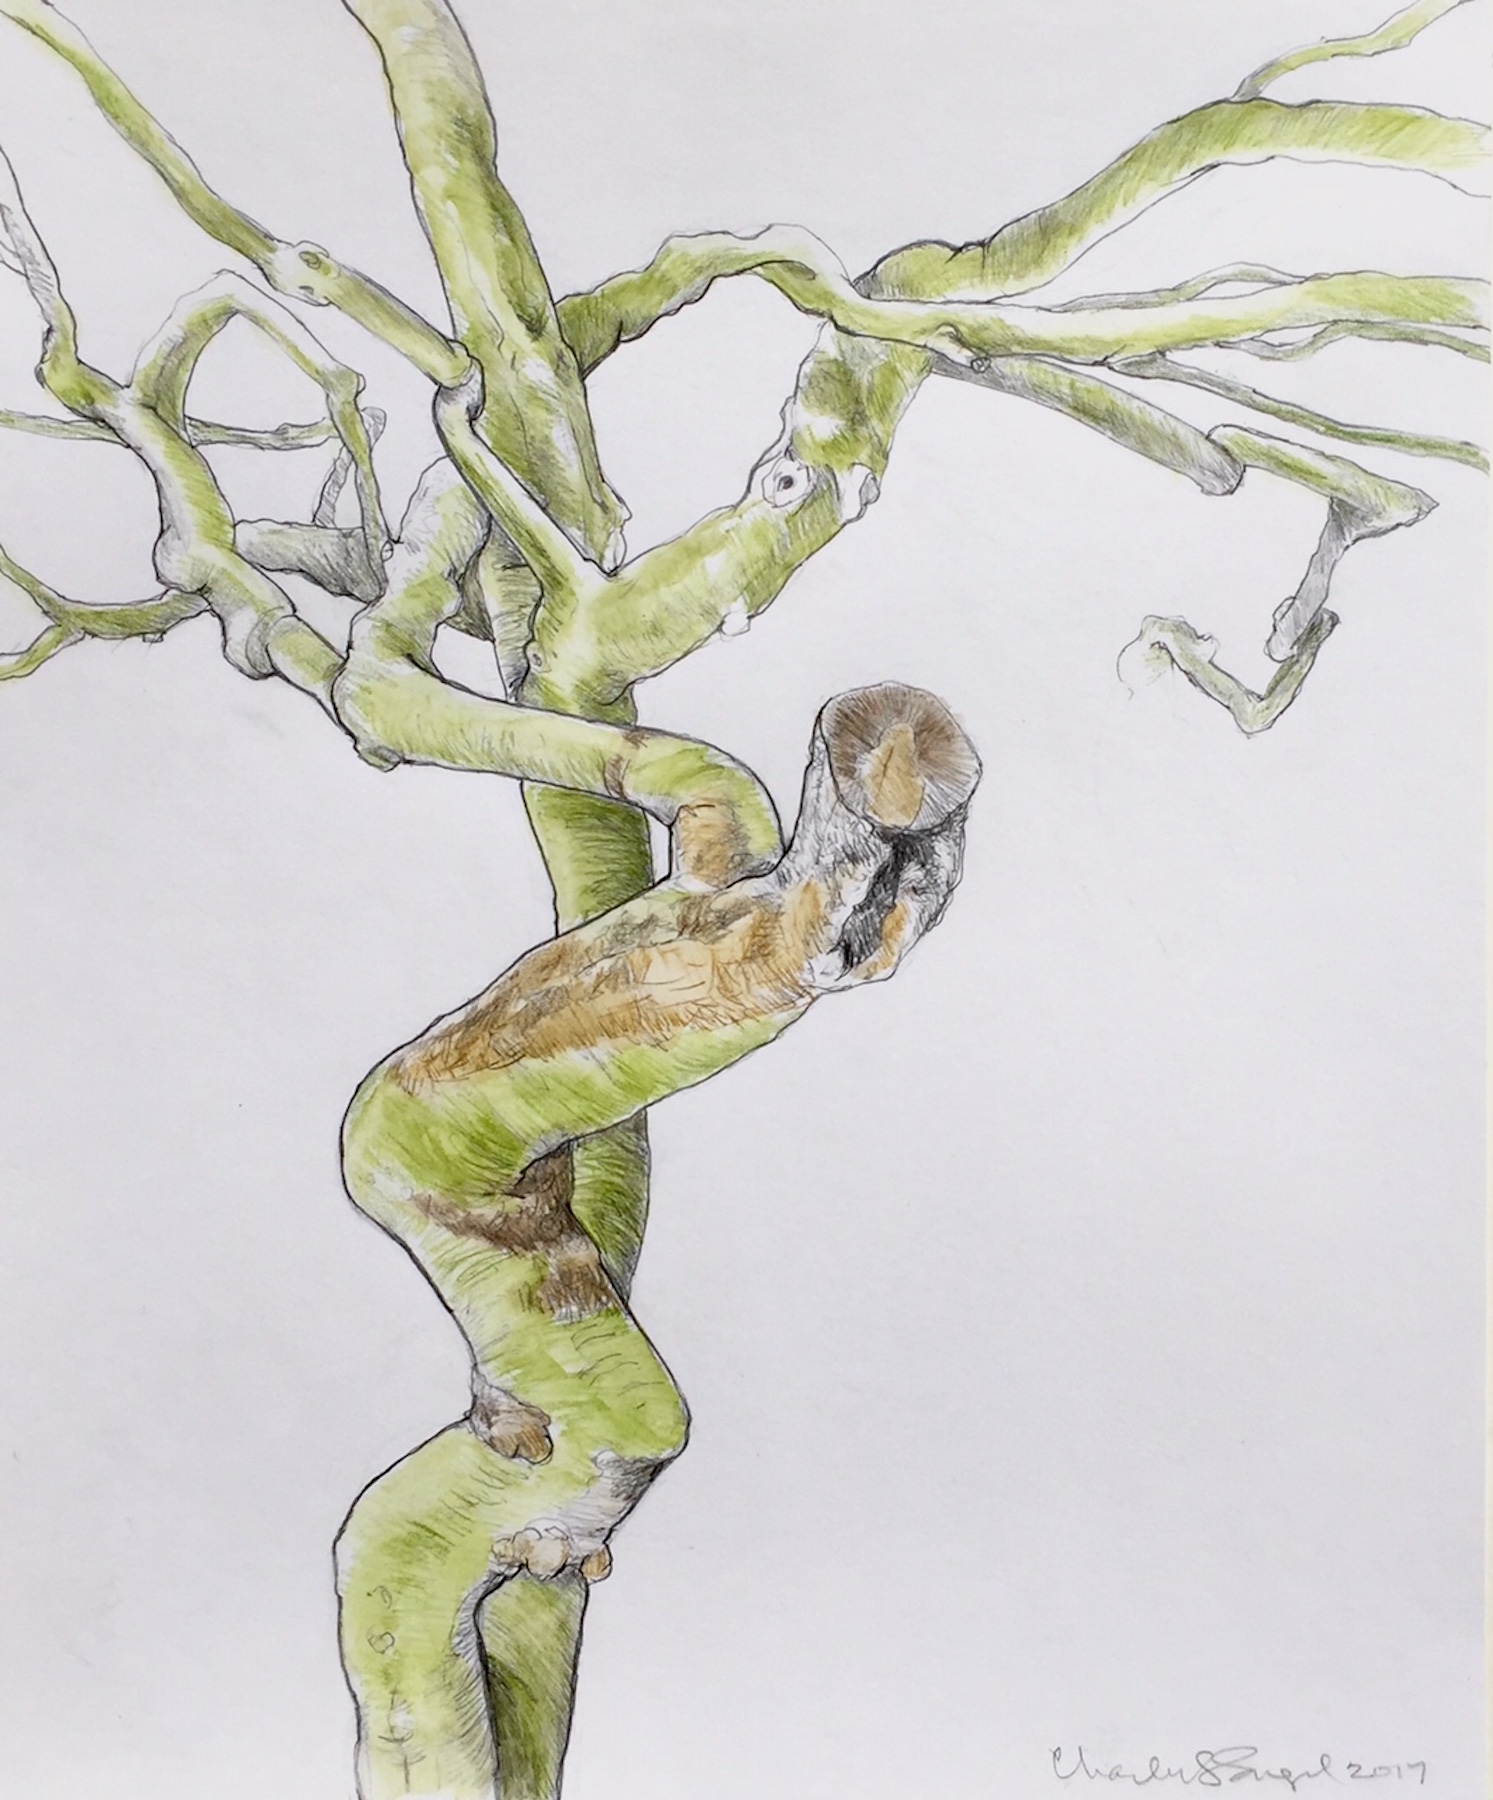   "The Owl Tree"  Graphite and Watercolor Pencil 21" x 25" 